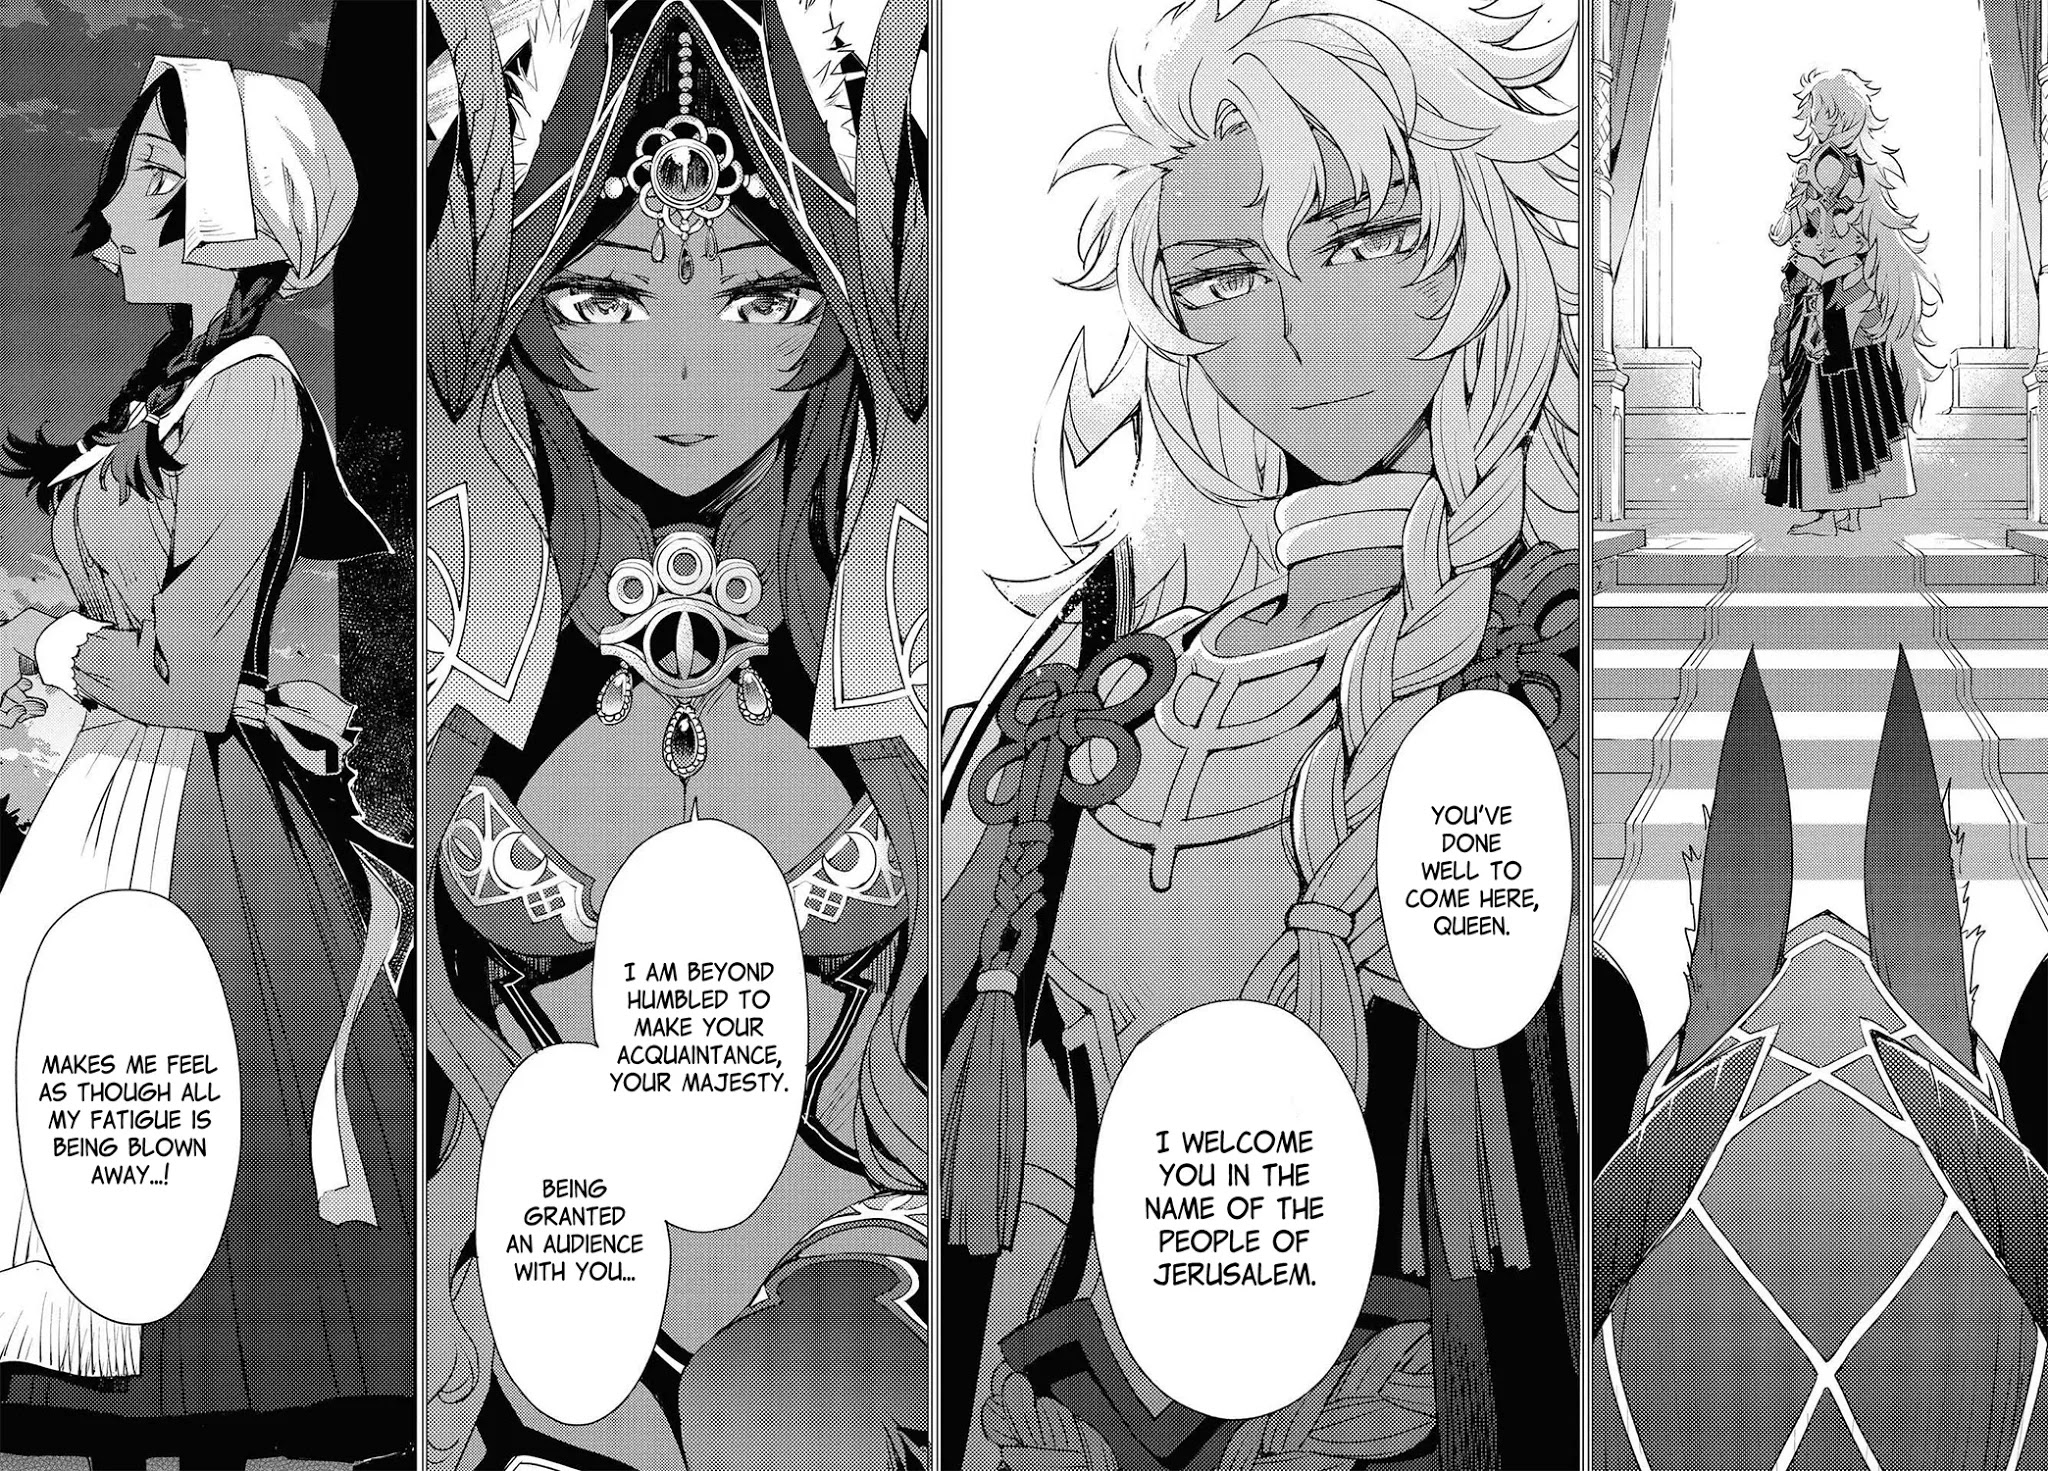 Fate/grand Order: Epic Of Remnant - Subspecies Singularity Iv: Taboo Advent Salem: Salem Of Heresy Chapter 6